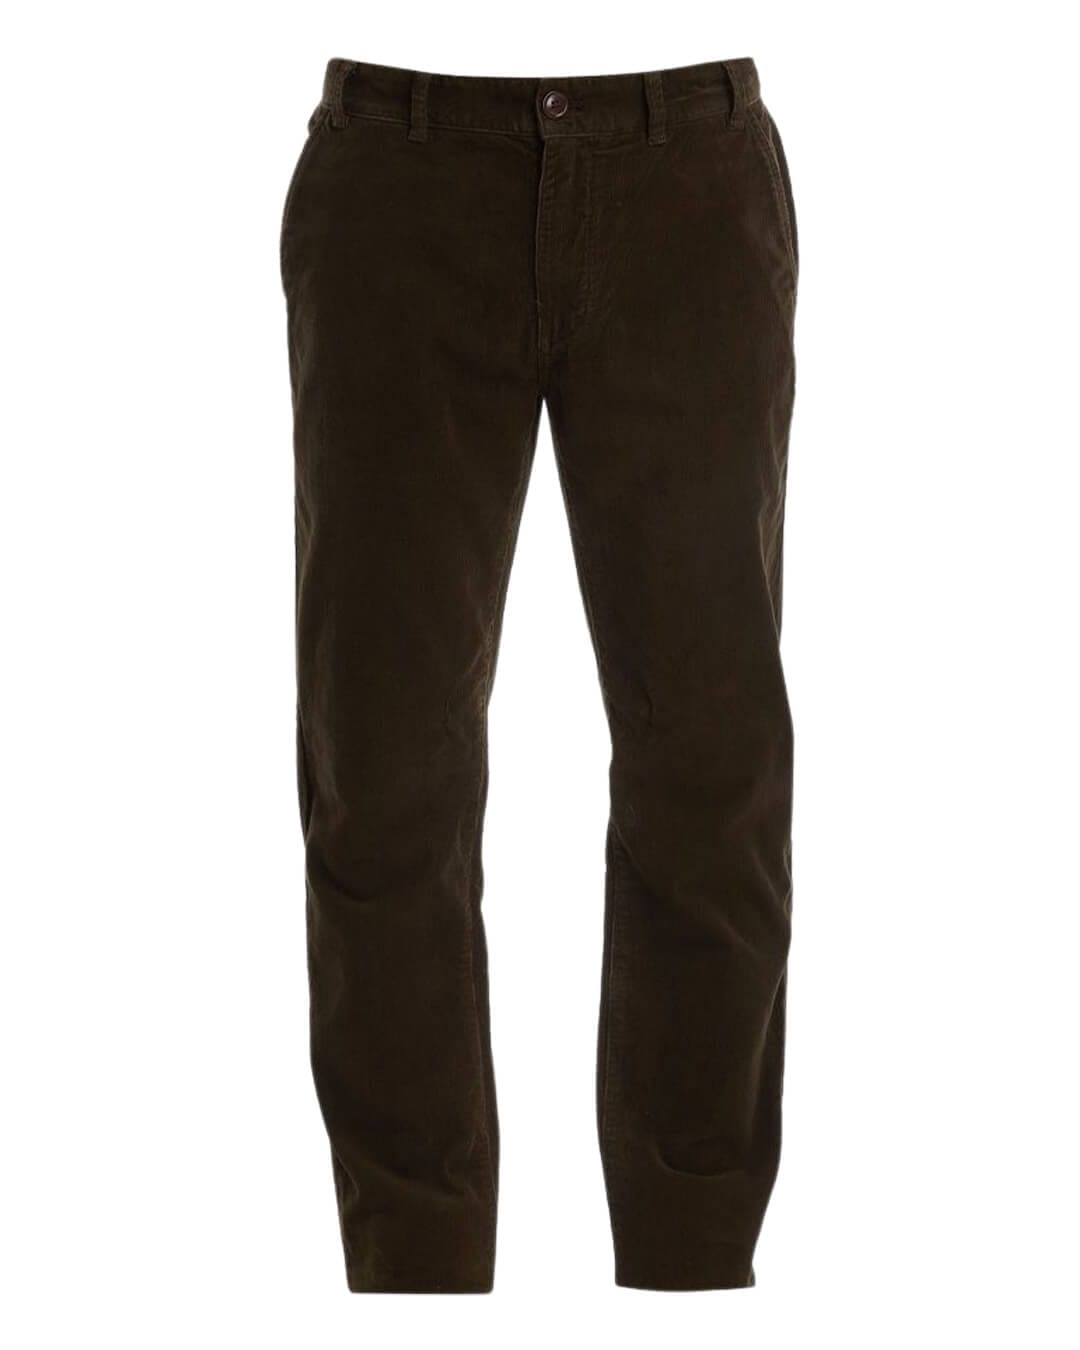 Barbour Trousers Barbour Neuston Green Stretch Cord Trousers